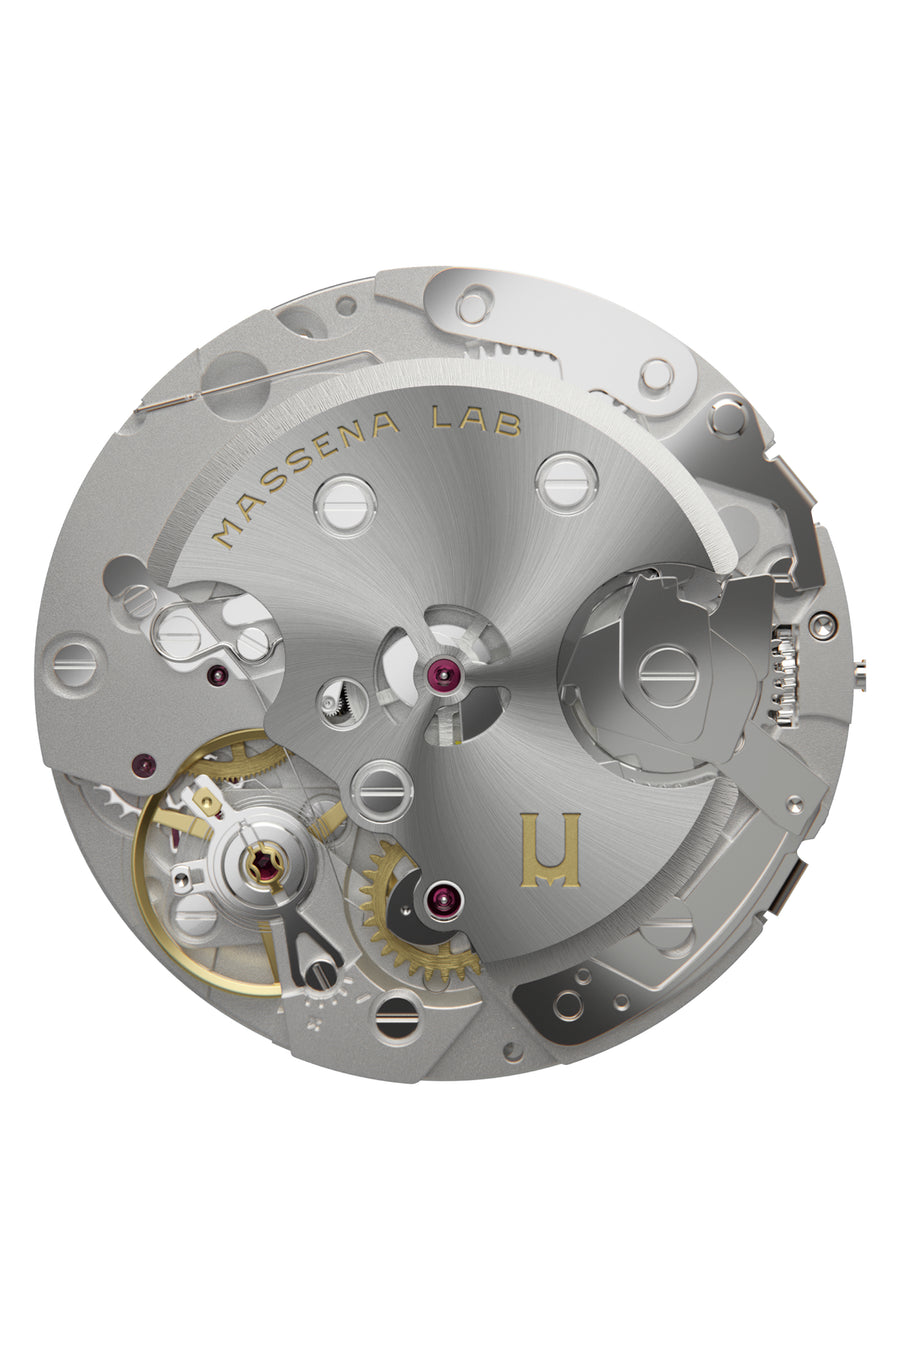 The Massena LAB Uni-Racer is housed with SW510 M élaboré hand-wound movement. The Massena LAB Uni-Racer displays hours, minutes, with small seconds, chronograph with central minute counter and 30 minute subdial.